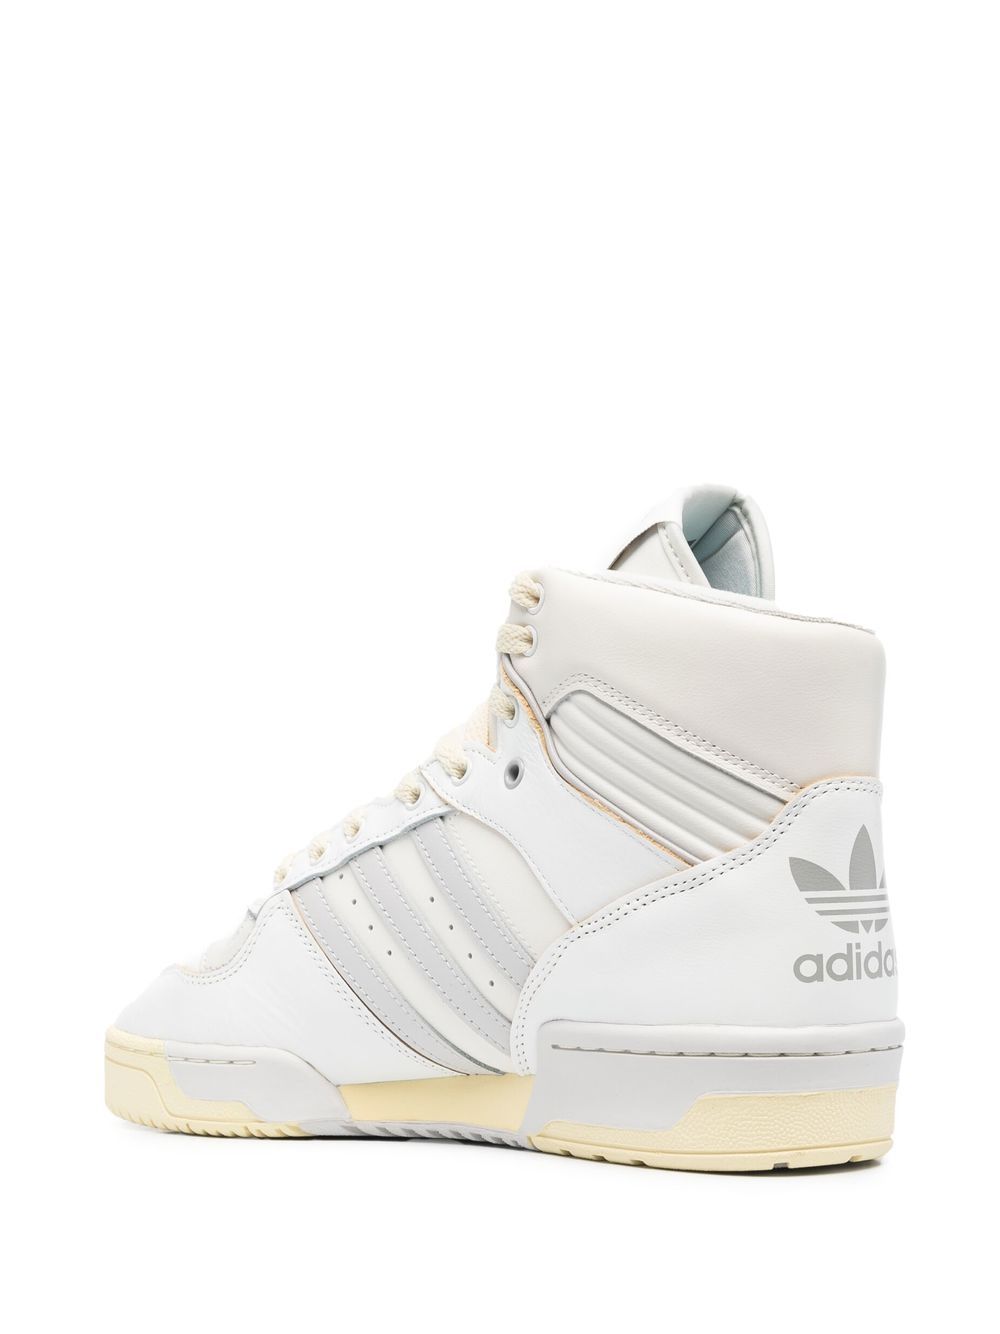 platform moden pust White and grey Rivalry high-top sneakers - men - ADIDAS -  divincenzoboutique.com